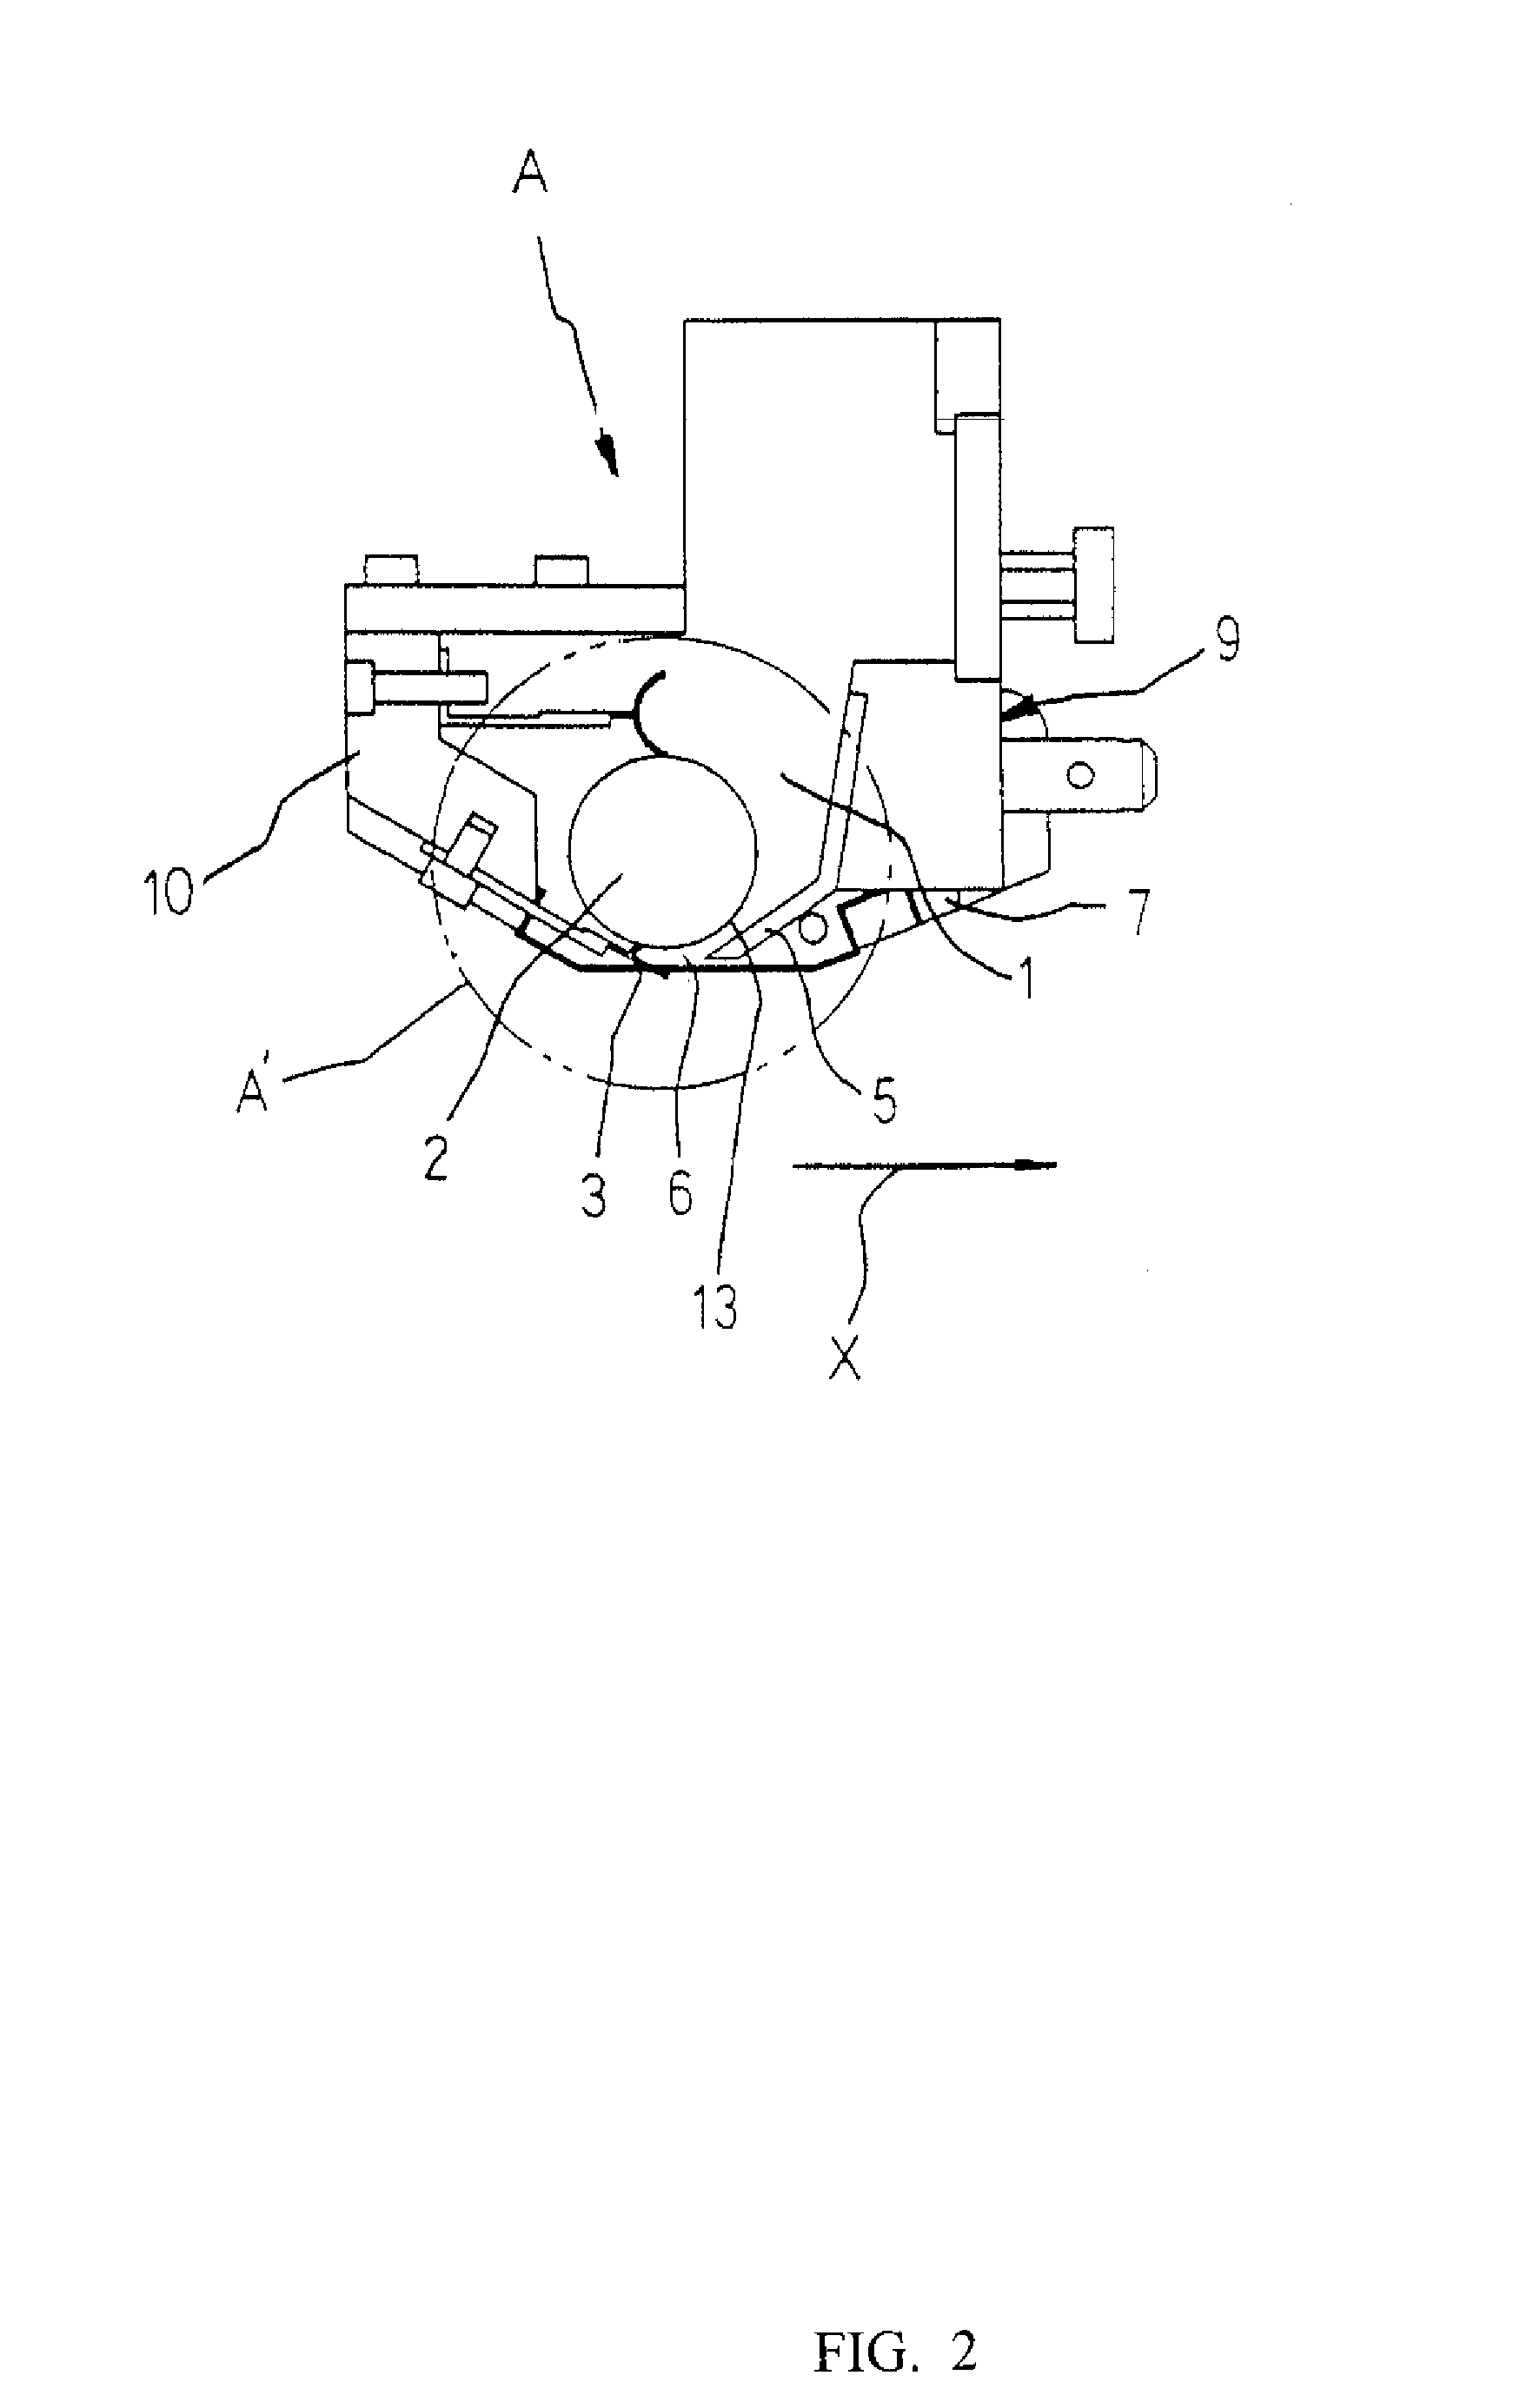 Screen printing apparatus having paste chamber with discharge opening and structure for introducing paste residue from previous printing into discharge opening